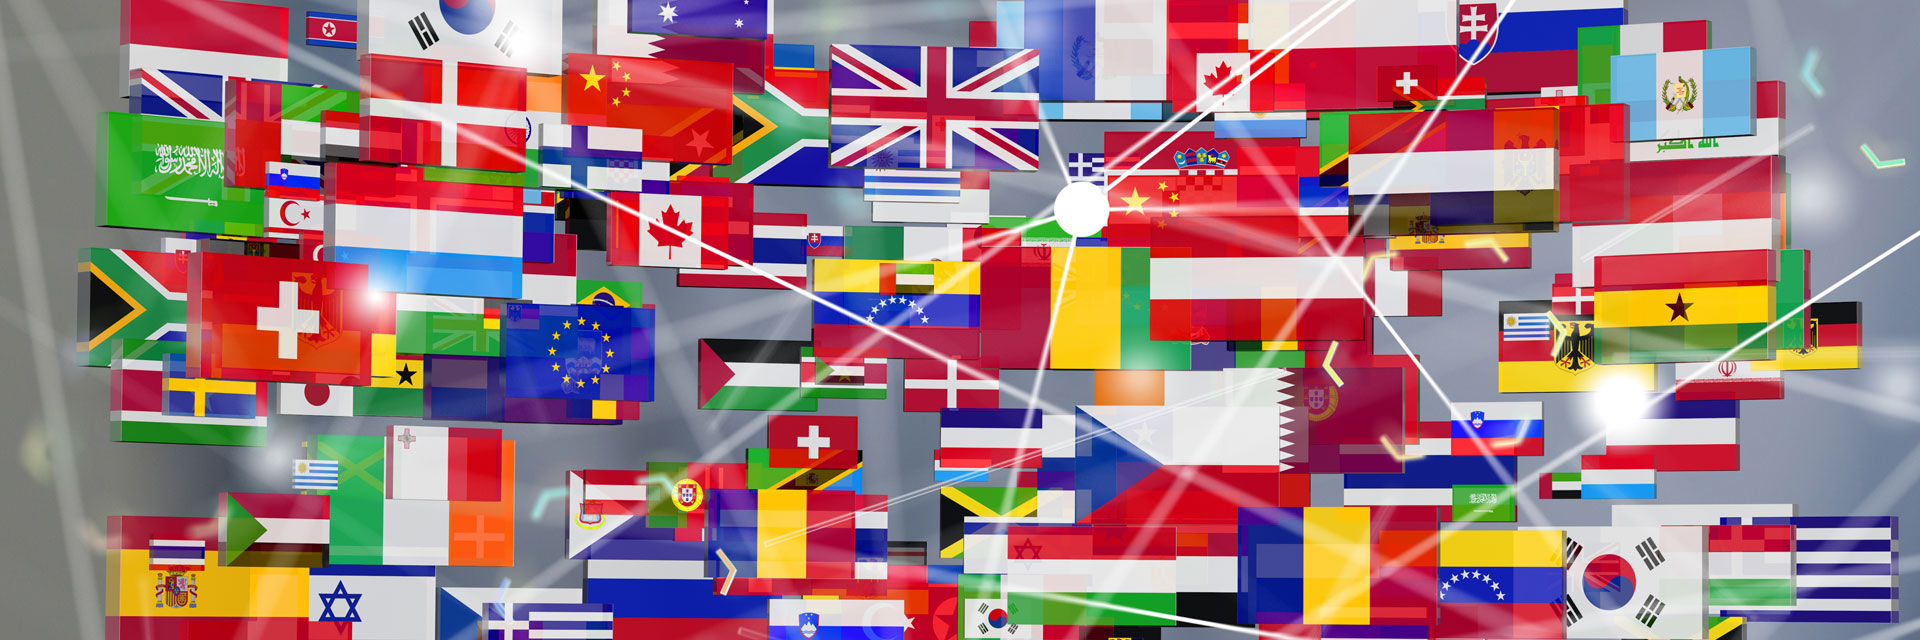 abstract image containing flags of the world